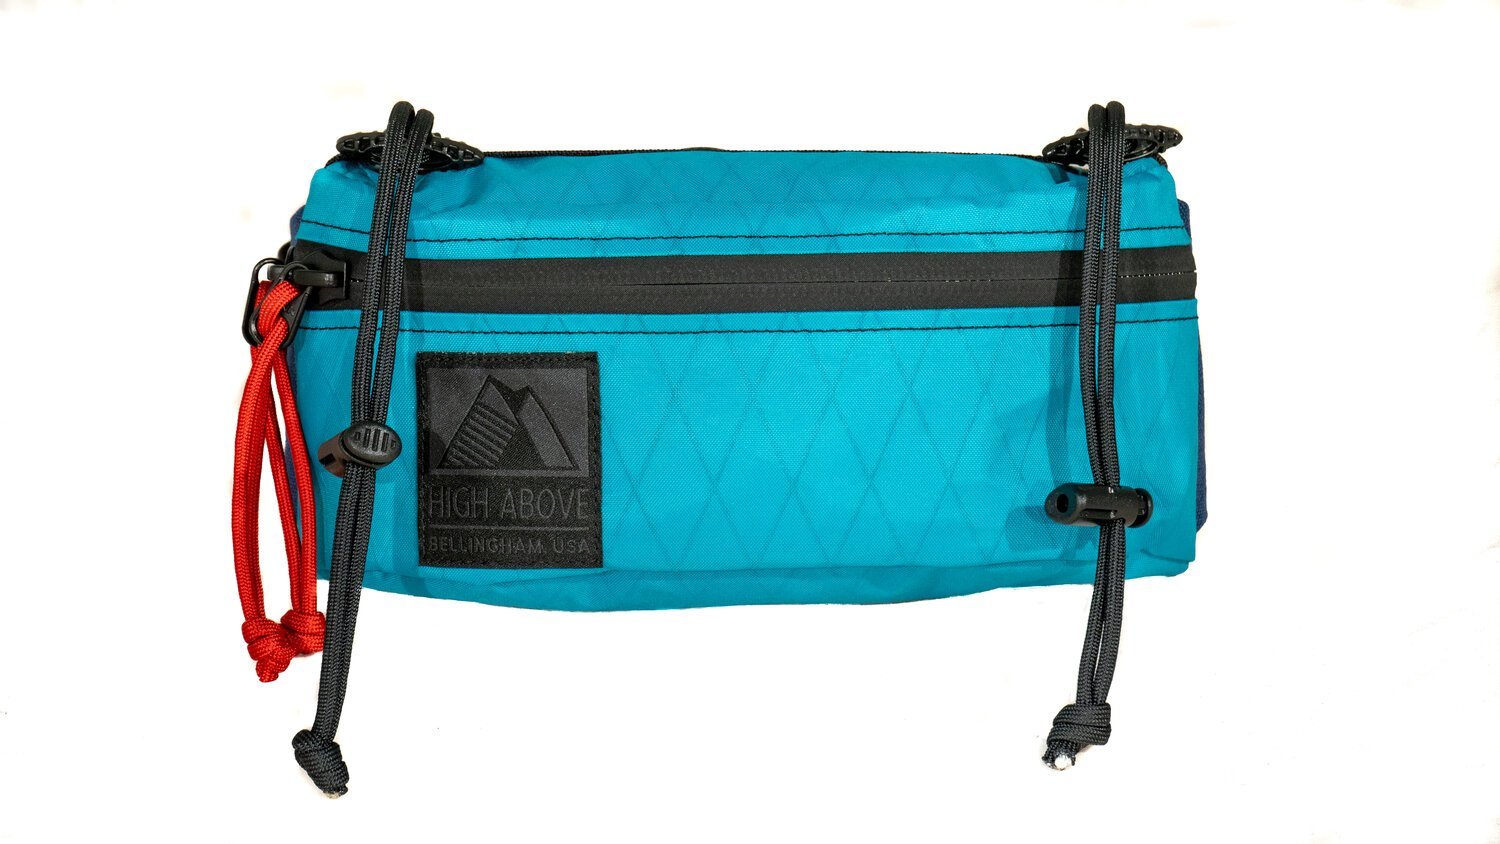 High above radpack in teal with extra load straps 